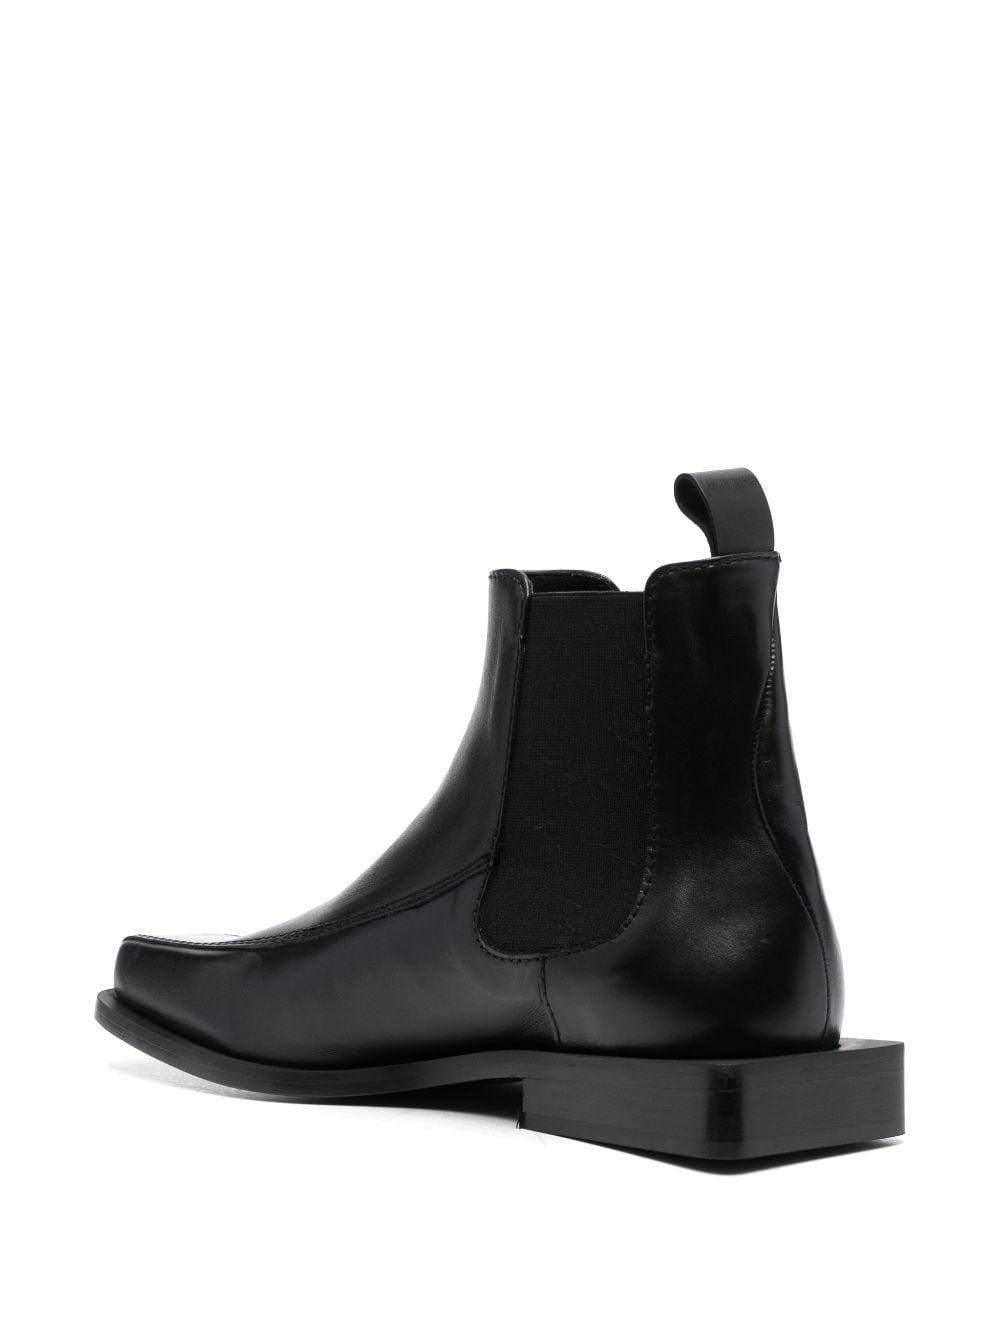 Tabali leather ankle boots - 3